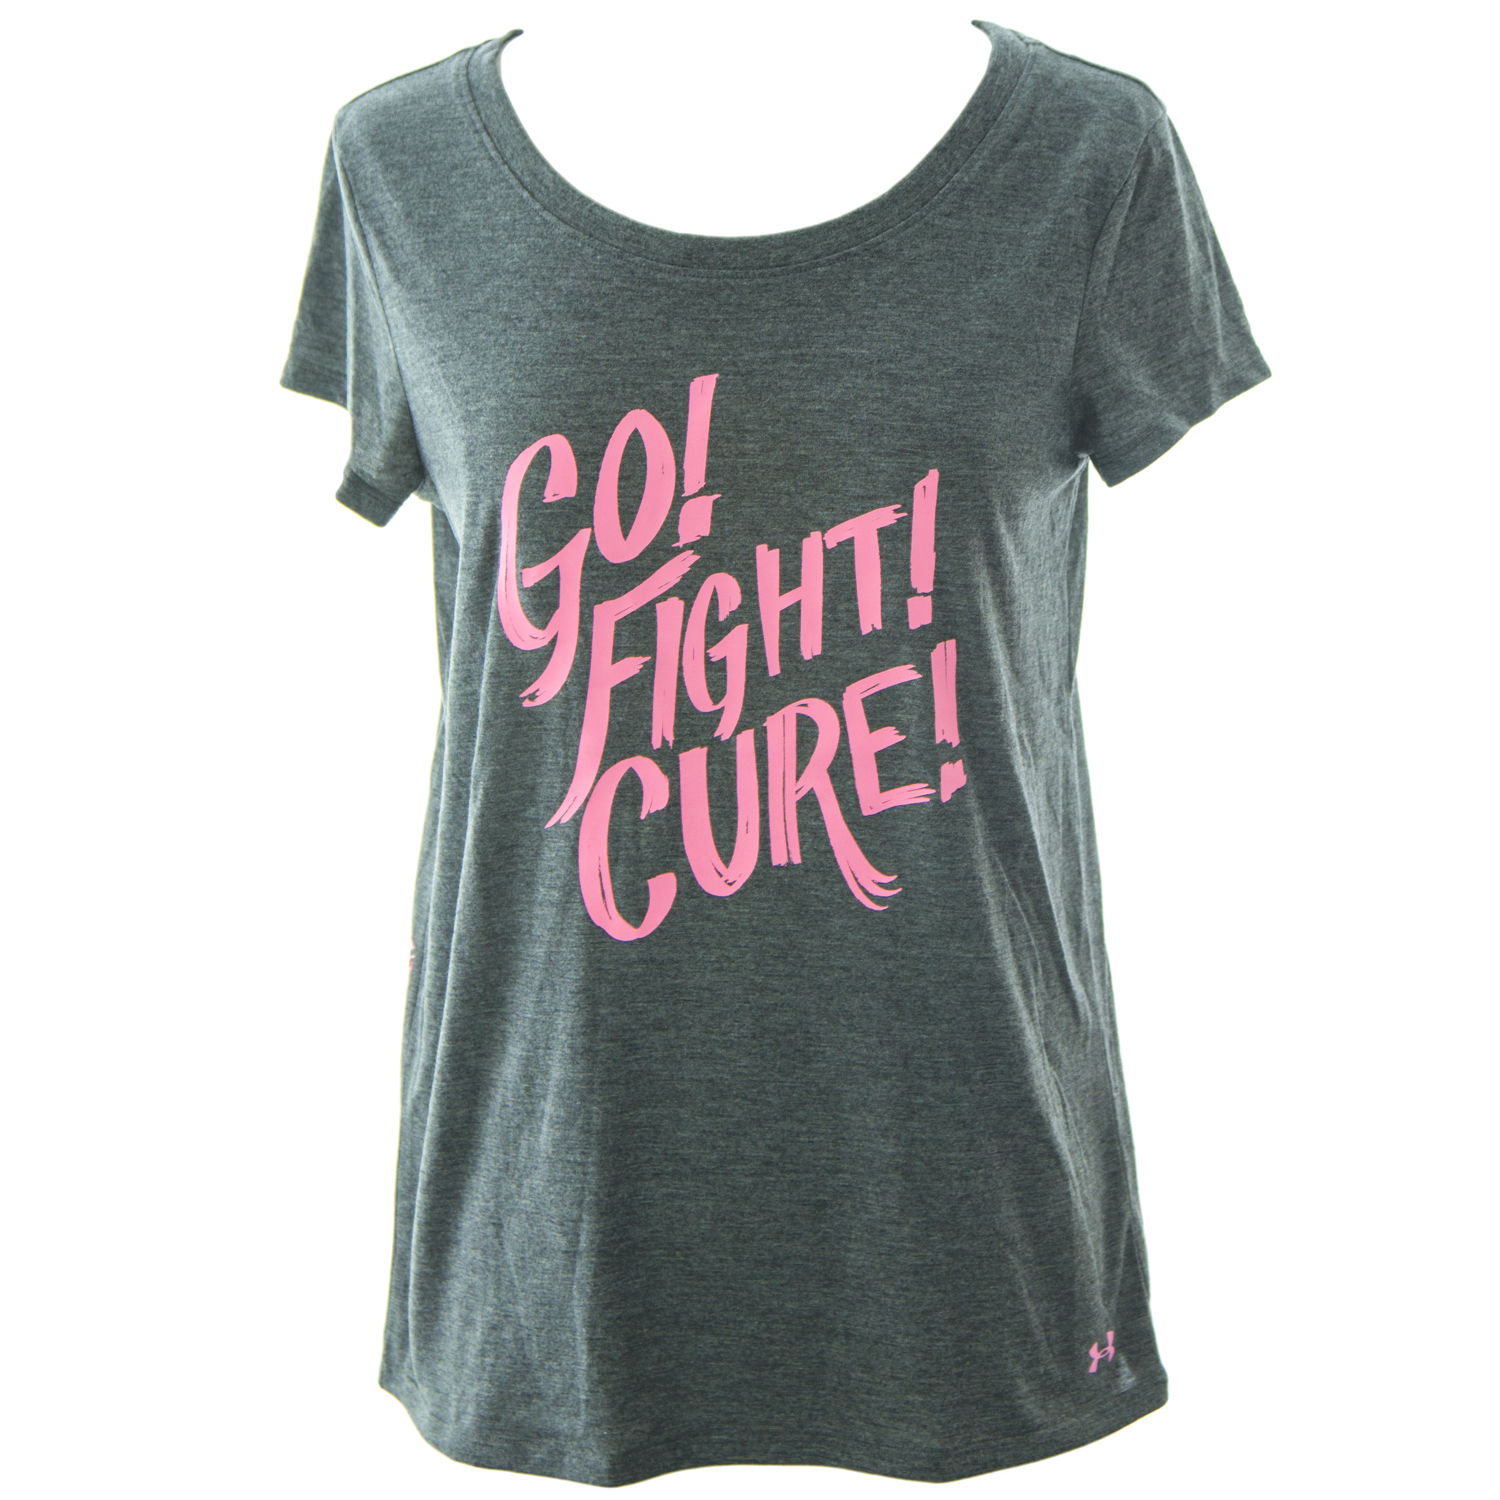 Under Armour Women's Power in Pink Go Fight Cure T-Shirt Small Charcoal - image 1 of 2